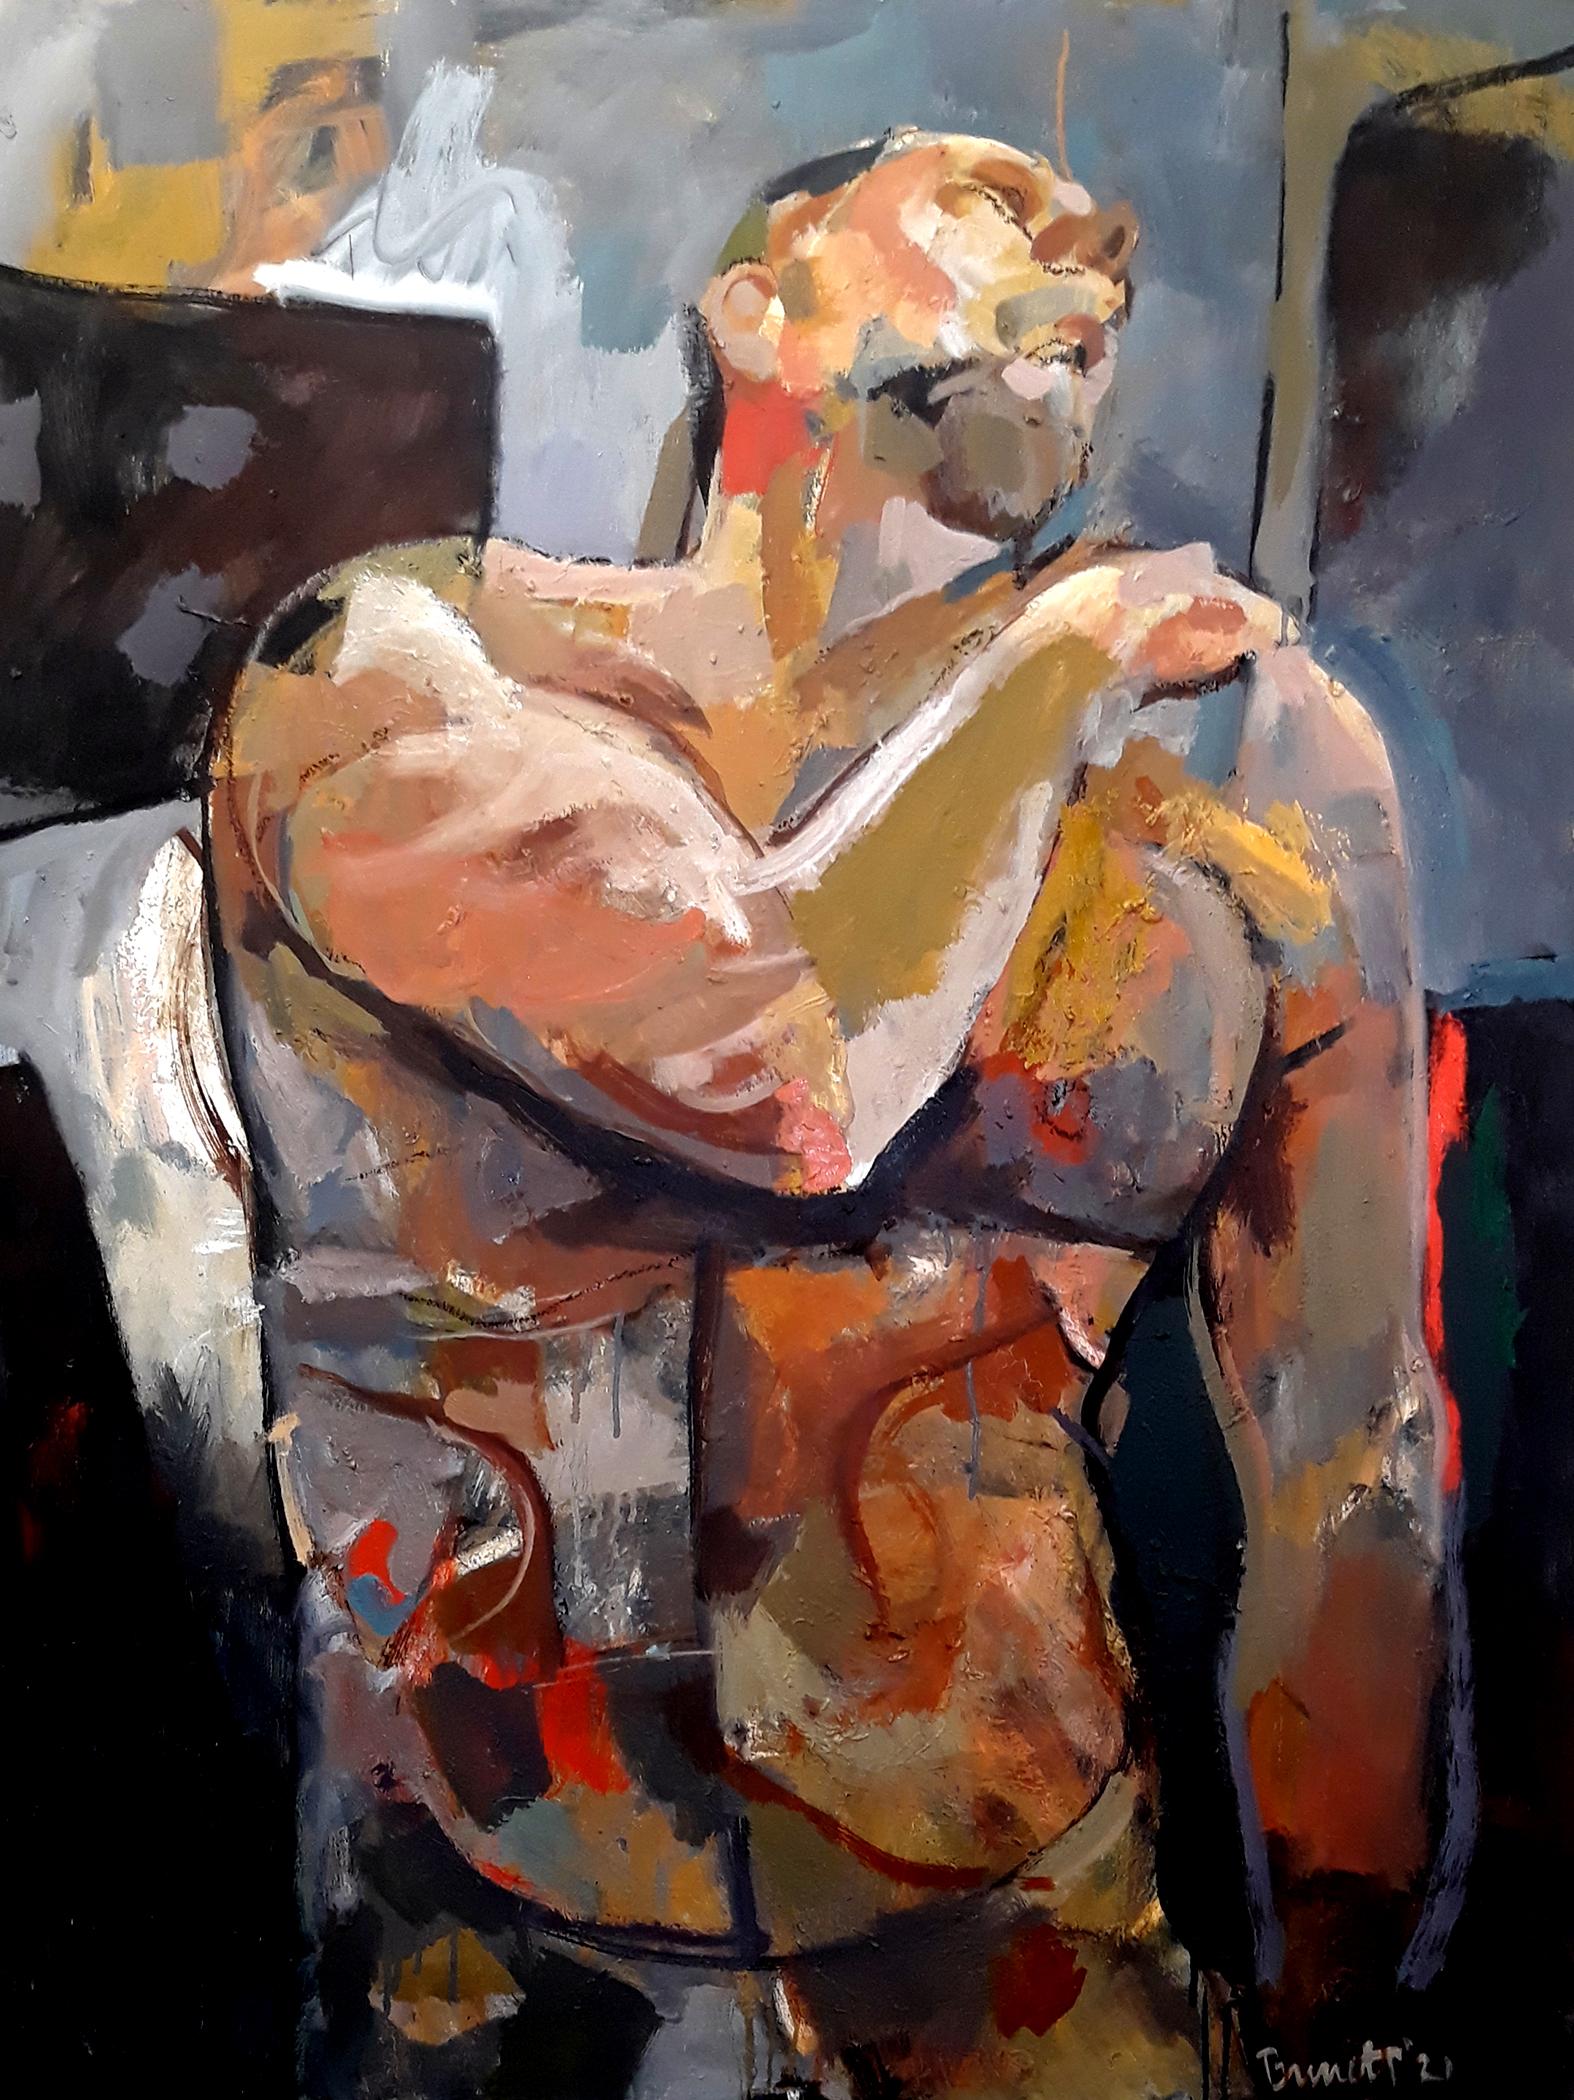 Tom Bennett Figurative Painting - Interminable, colorful abstracted male nude figure modern cubist